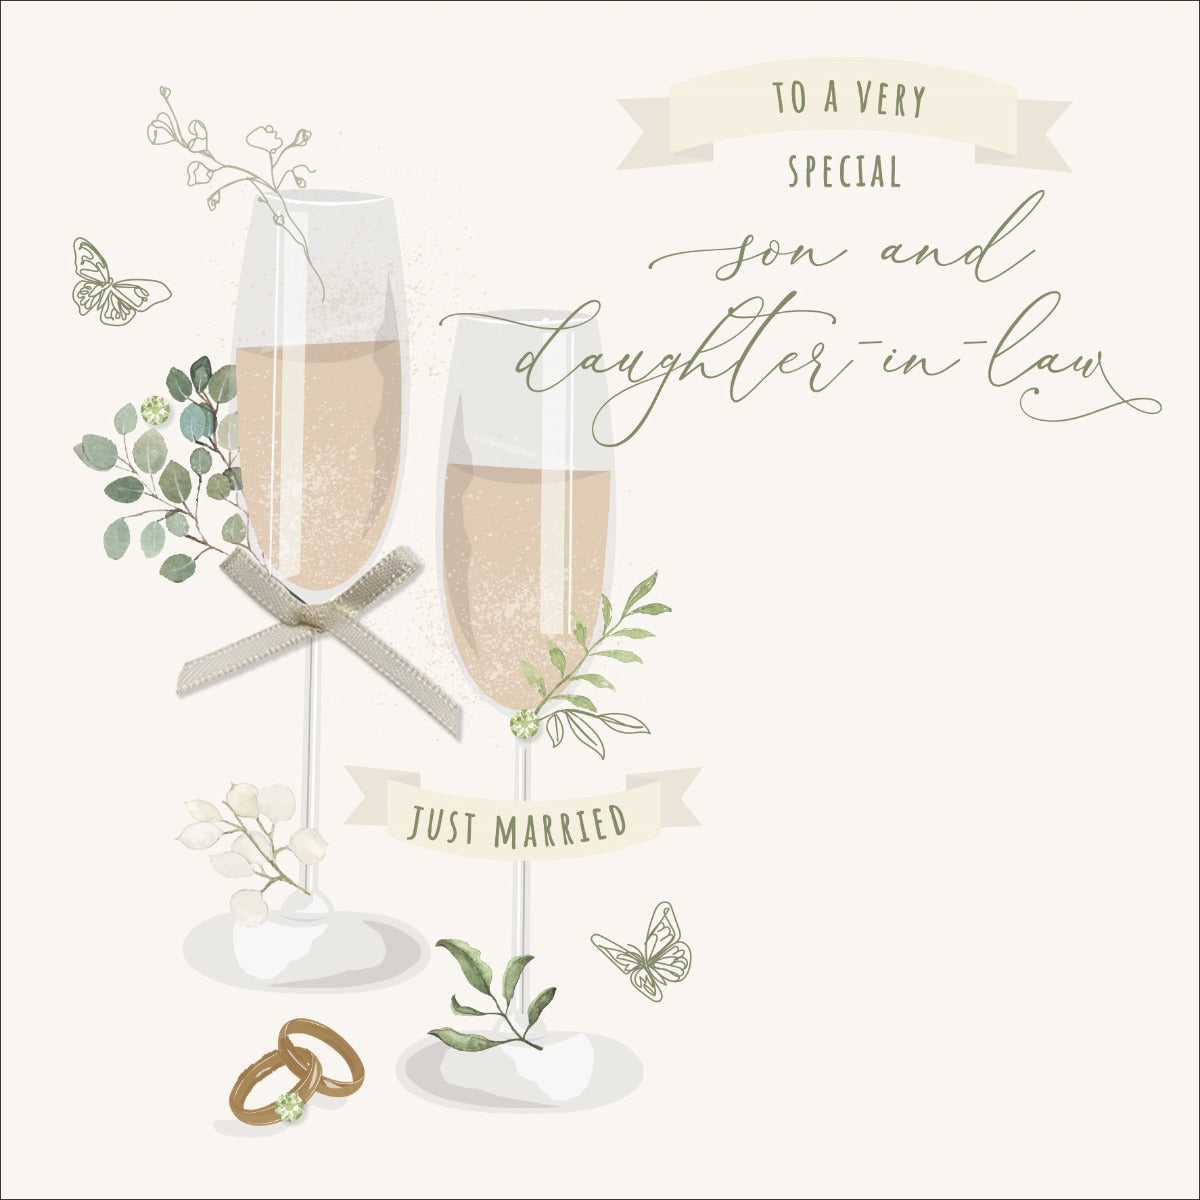 Besotted - Daughter and Son-in-law Wedding Day Card